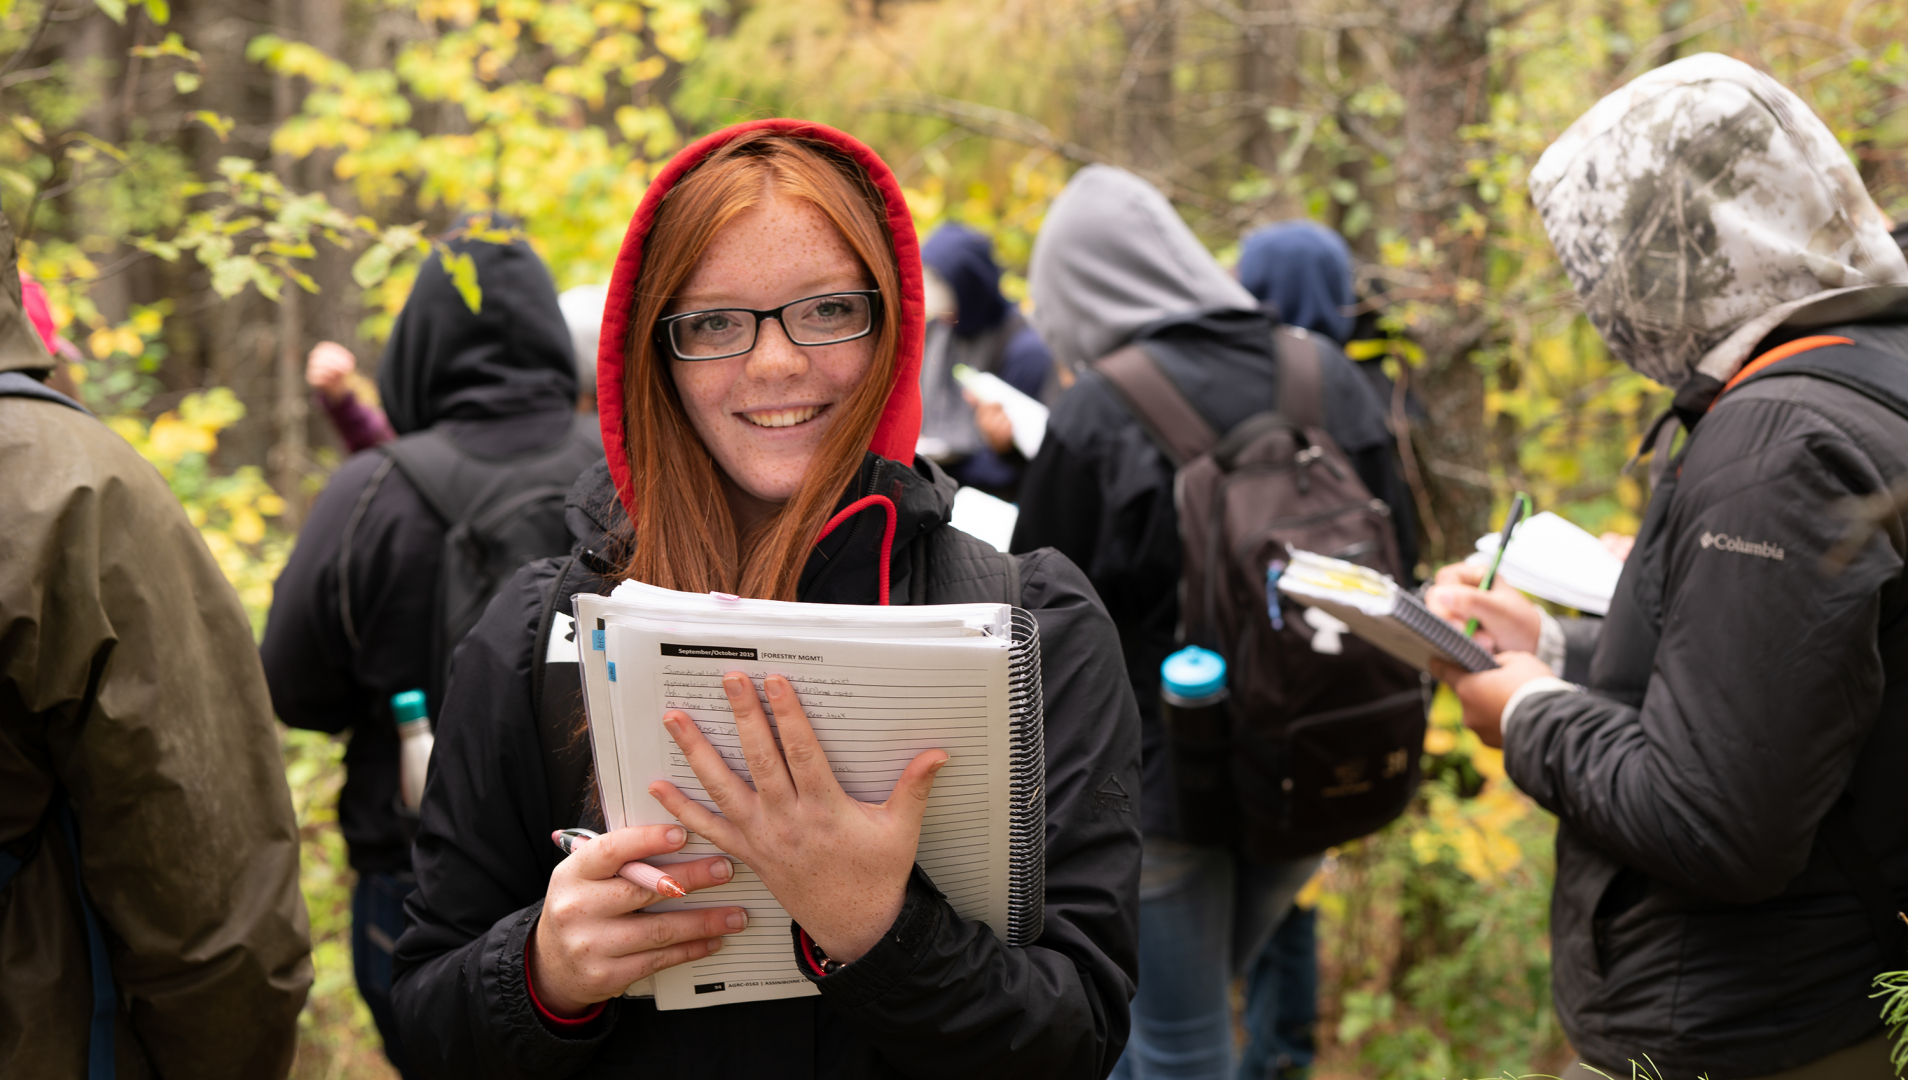 A student with long red hair and a red hood up on her head looks at the camera and holds a notebook. The student stands amongst trees and other students in the background.